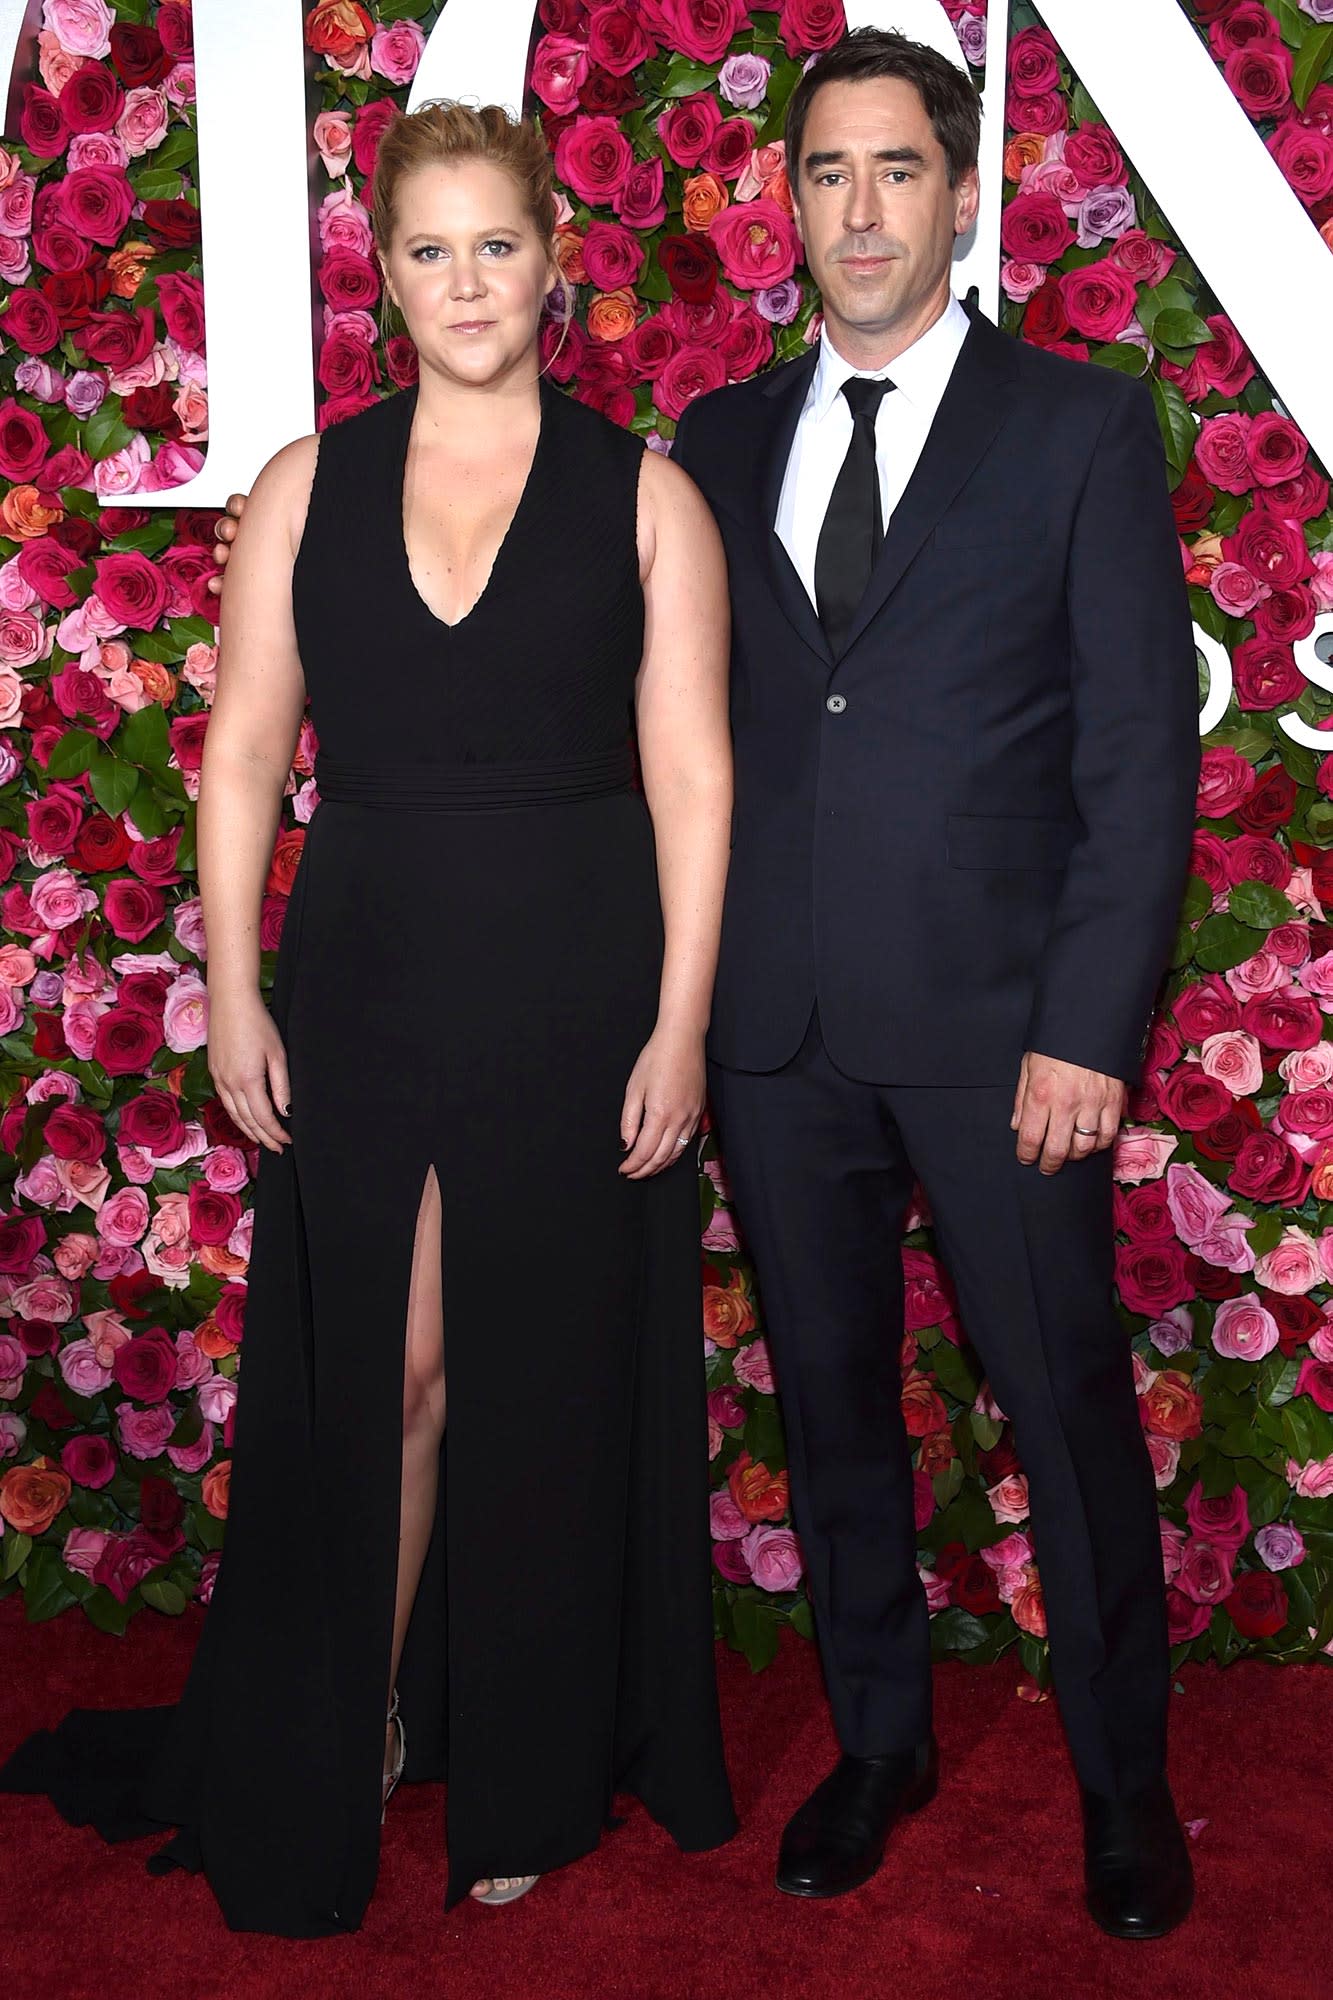 Amy Schumer and Husband Chris Fischer Step Out for Their First Awards